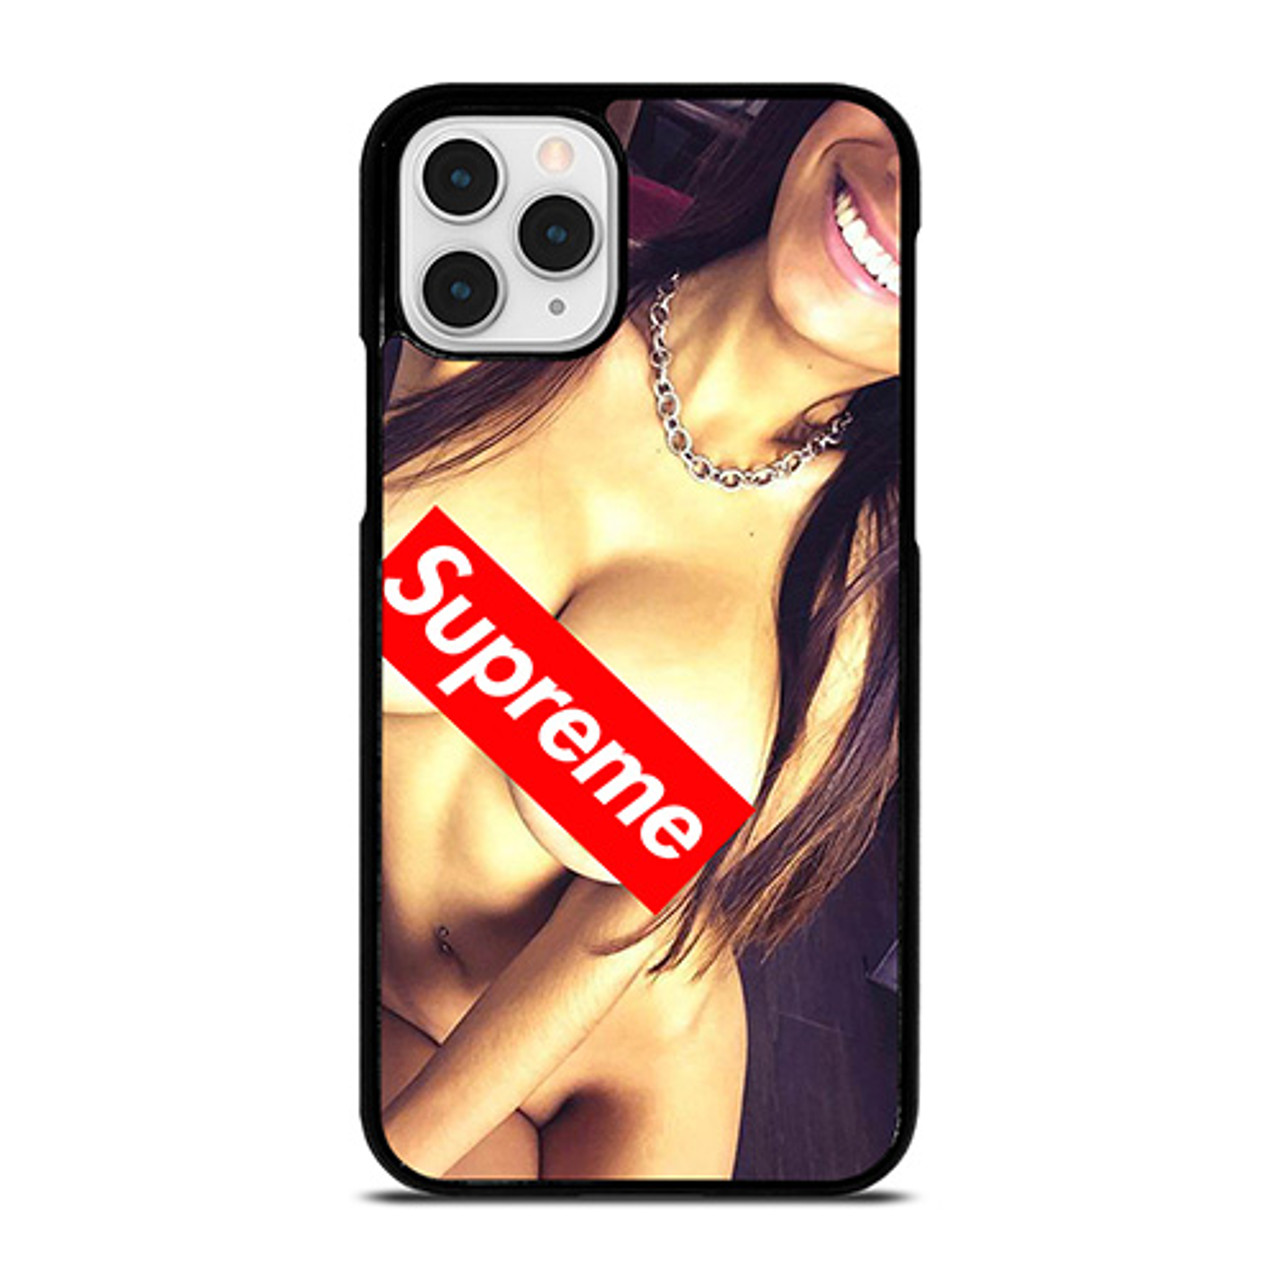 IPhone 7 Case - Supreme Fit Girl